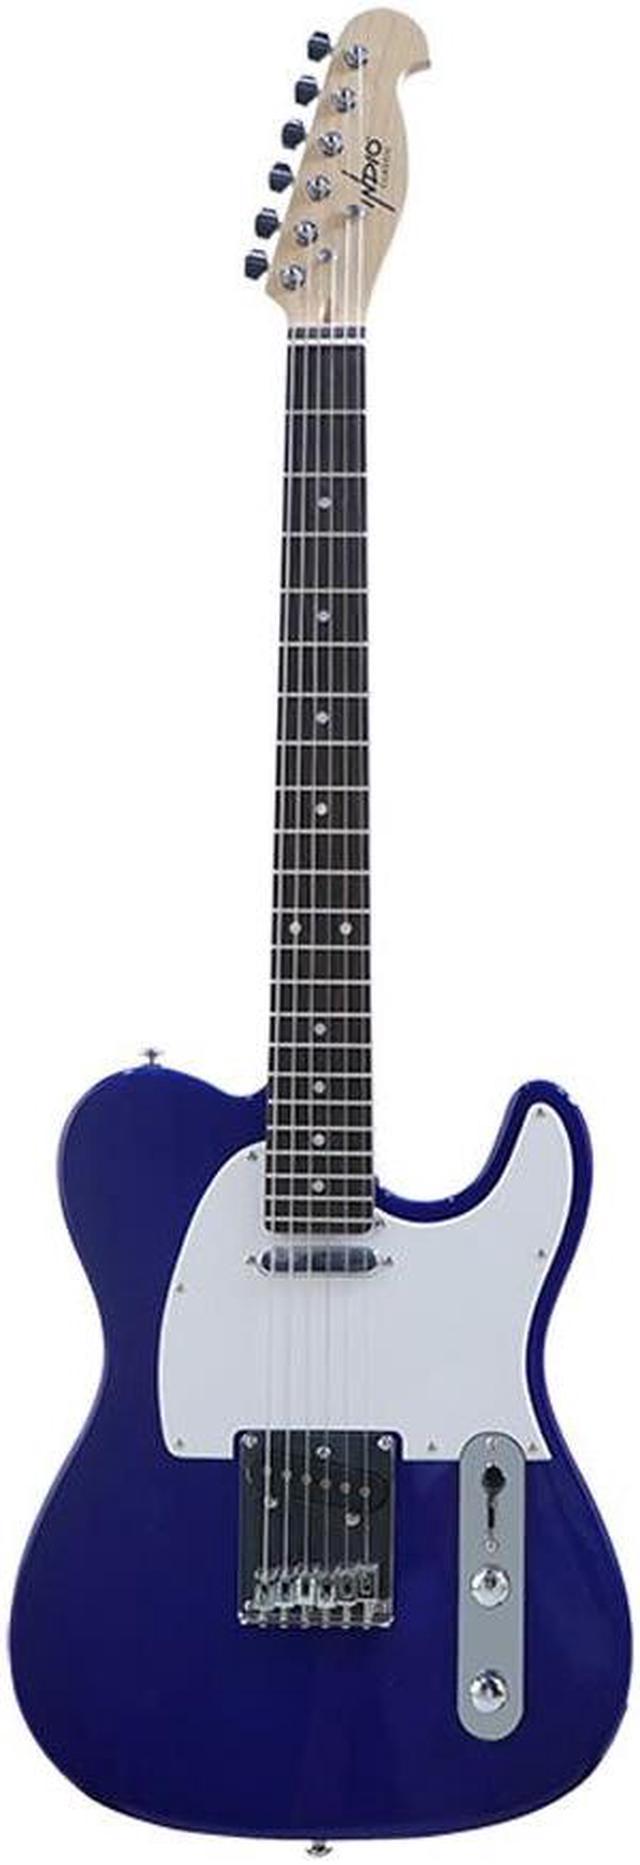 Monoprice Retro Classic Electric Guitar with Gig Bag, Blue, Right